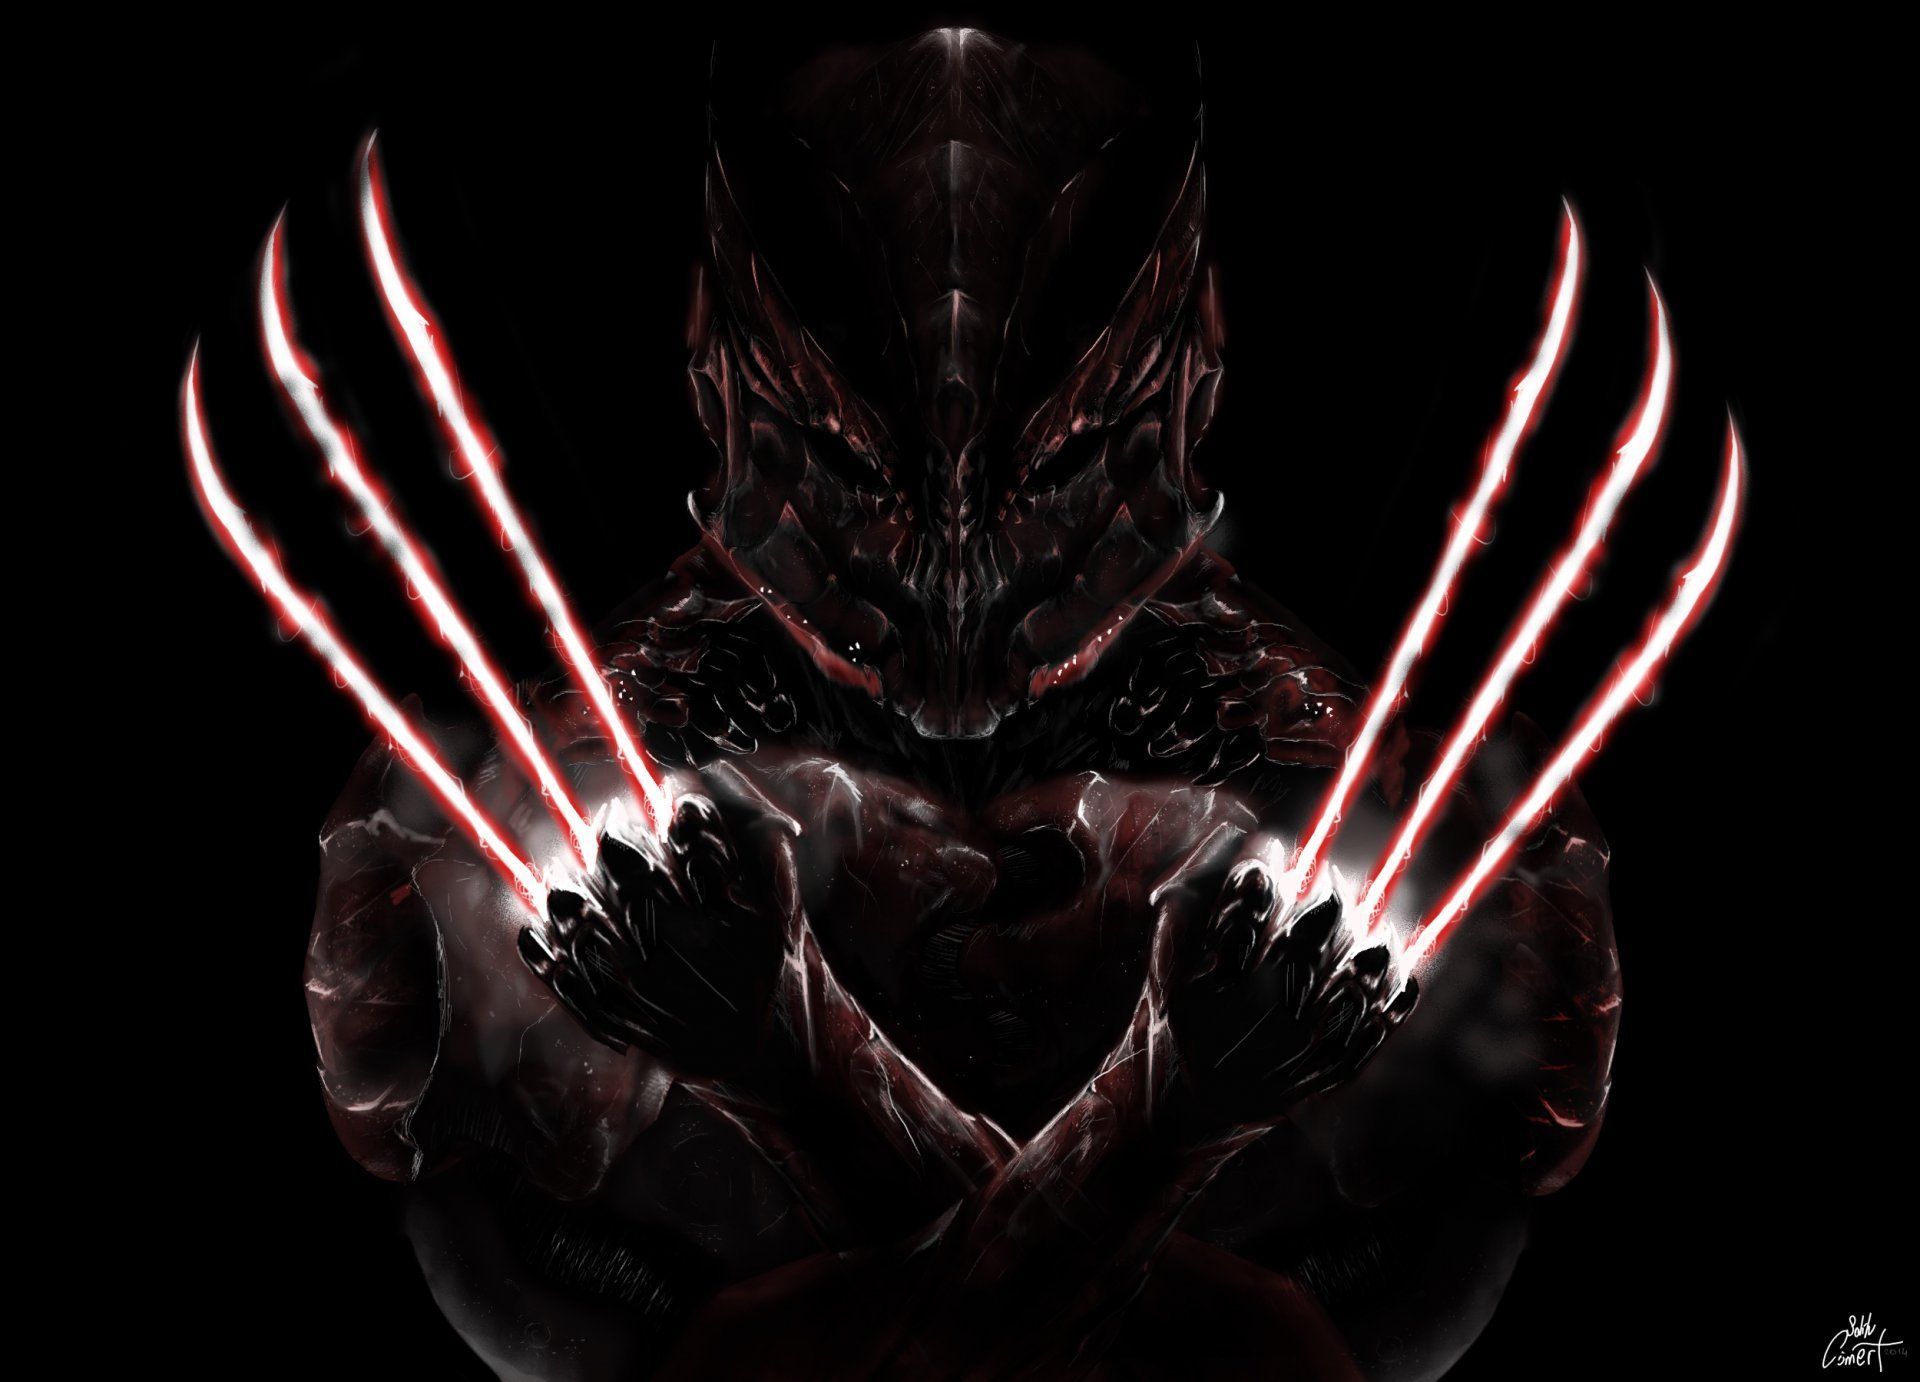 Download Wolverine Claws Wallpaper Photo For Free Wallpaper Monodomo. Wolverine claws, Wolverine, Wolverine xmen